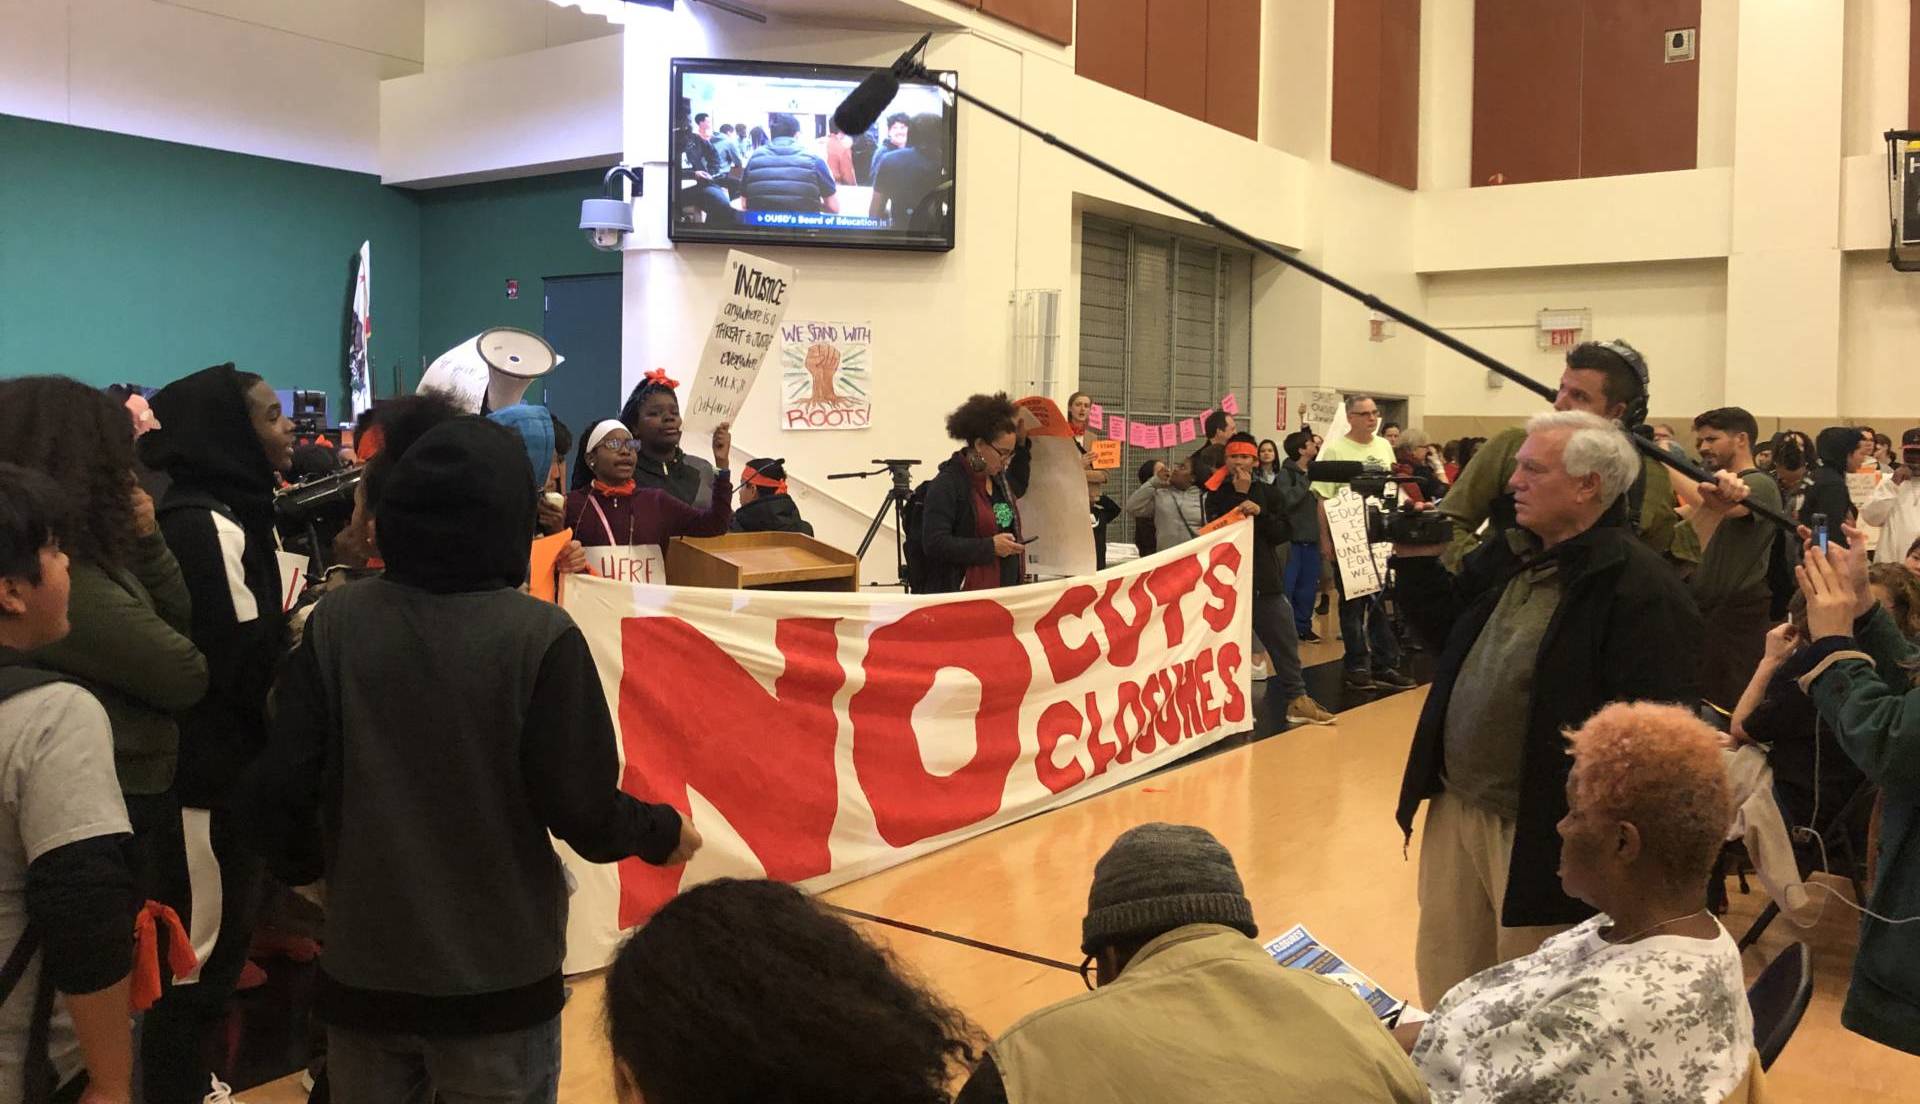 Demonstrators at an OUSD board meeting on Jan. 23, 2019, at La Escuelita Elementary School voiced their opposition to the district's proposal to close Roots International Academy, a small middle school in East Oakland. Julia McEvoy/KQED